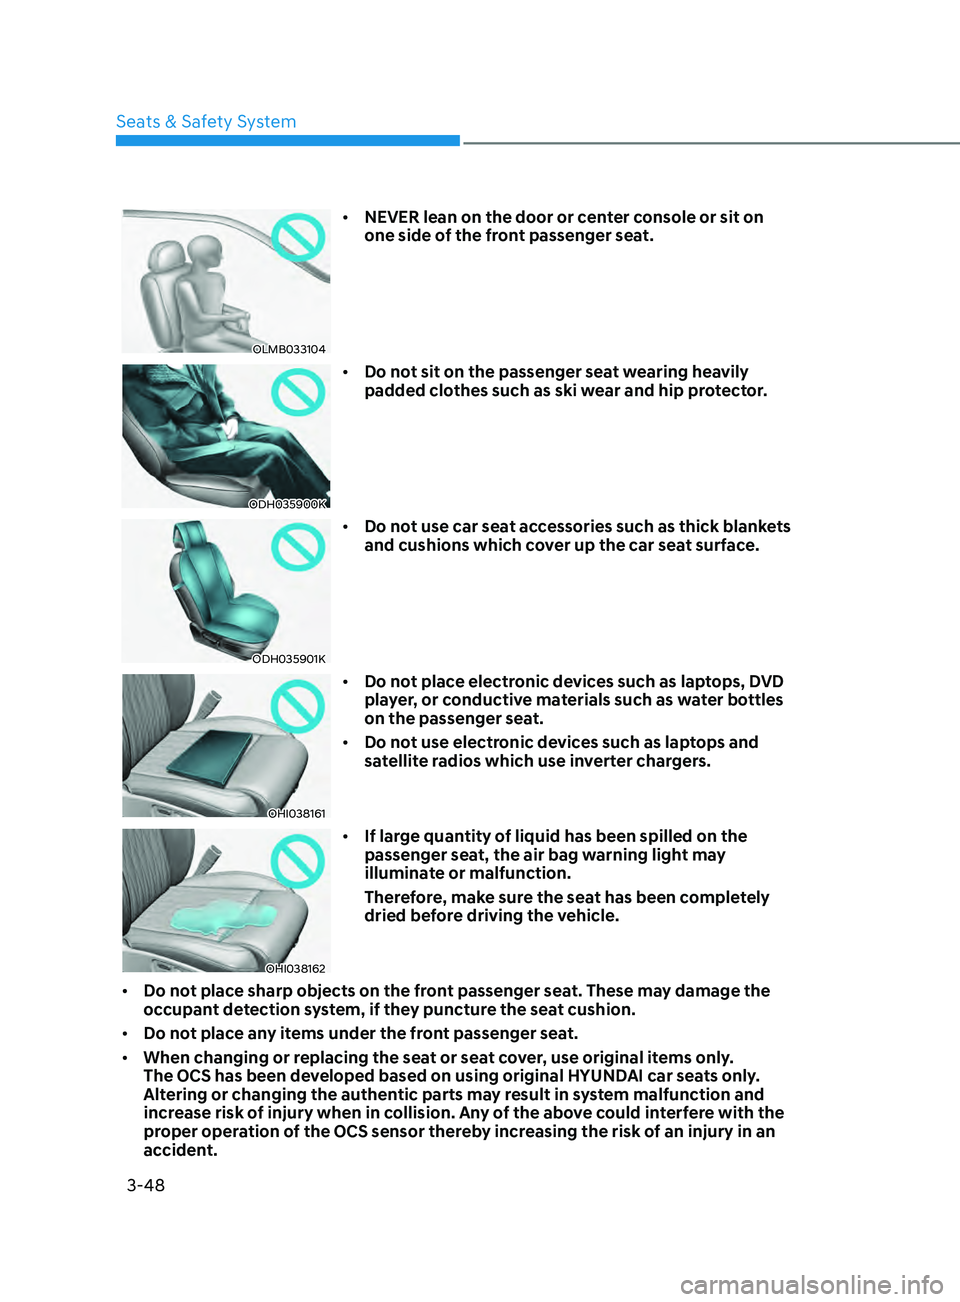 HYUNDAI ELANTRA 2021  Owners Manual 3-48
OLMB033104
•	NEVER lean on the door or center console or sit on 
one side of the front passenger seat.
ODH035900K
•	Do not sit on the passenger seat wearing heavily 
padded clothes such as sk